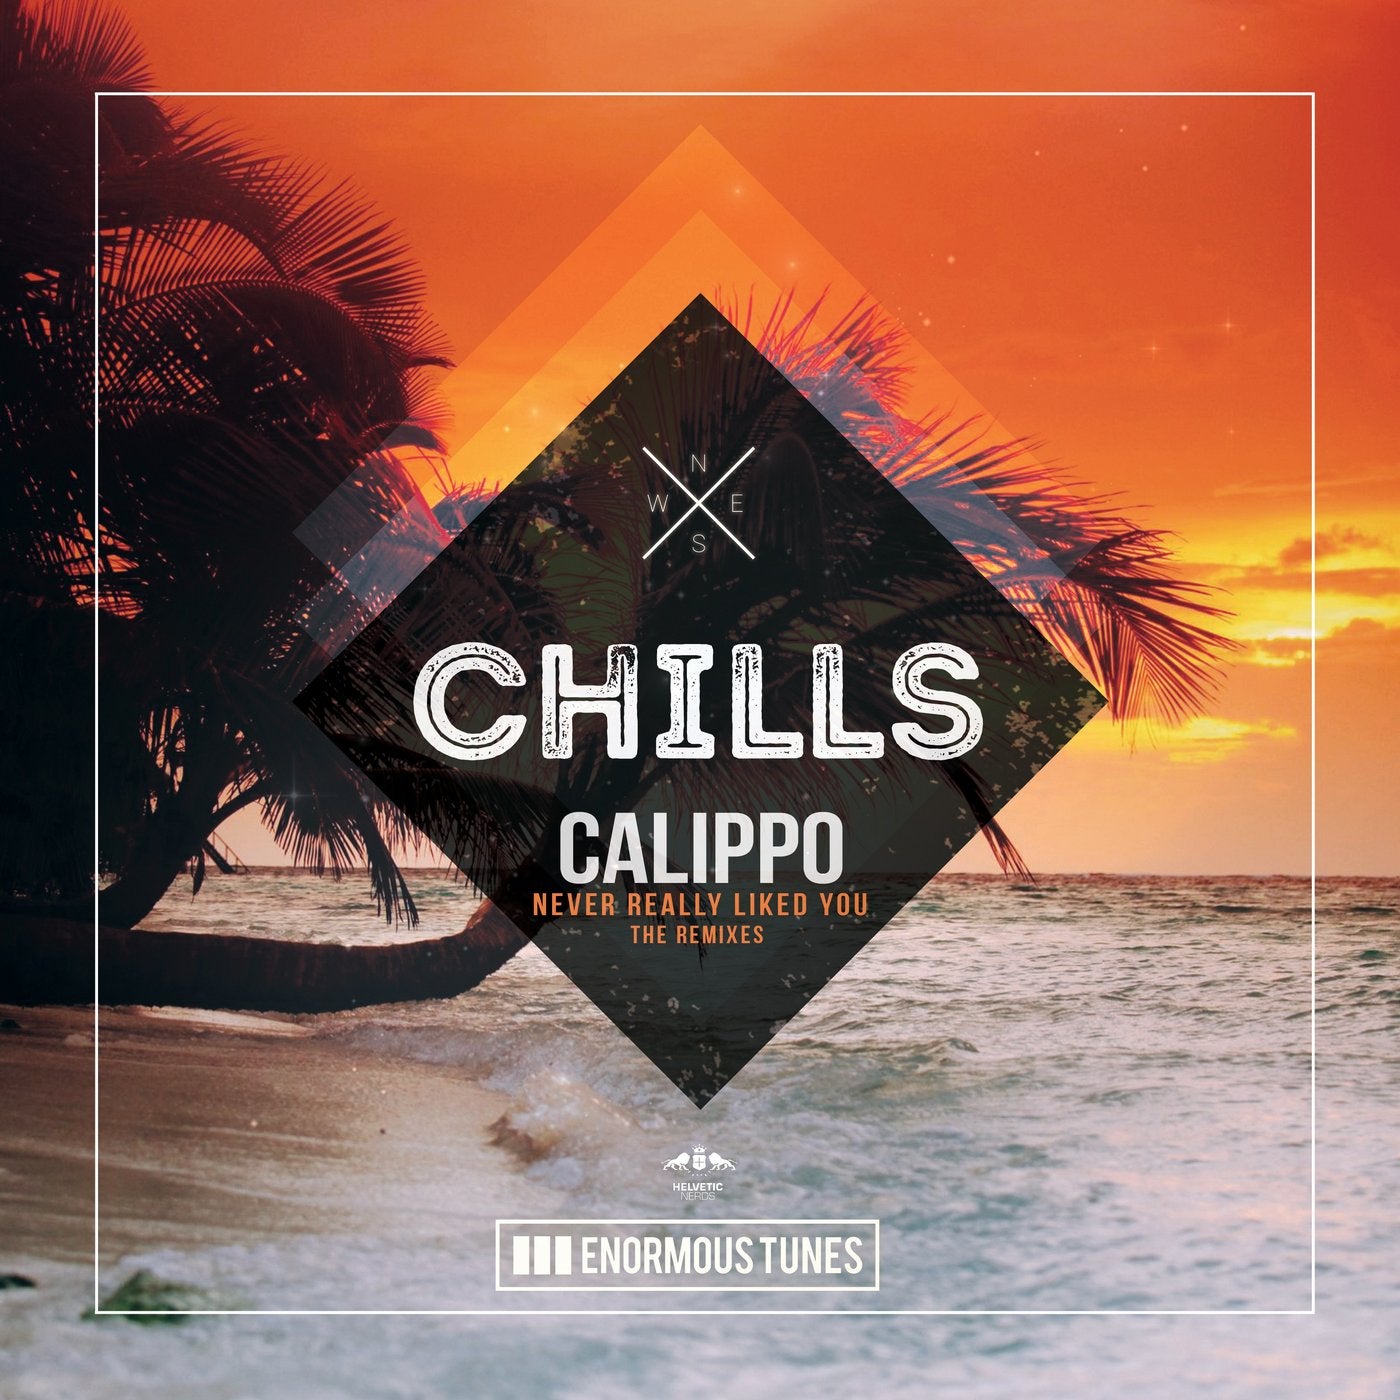 Remixes flac. Calippo - Ain't nothing hurting. Calippo Somebody else (Extended Mix). Like you Remix 2019. Calippo Alive (Esquire Remix).